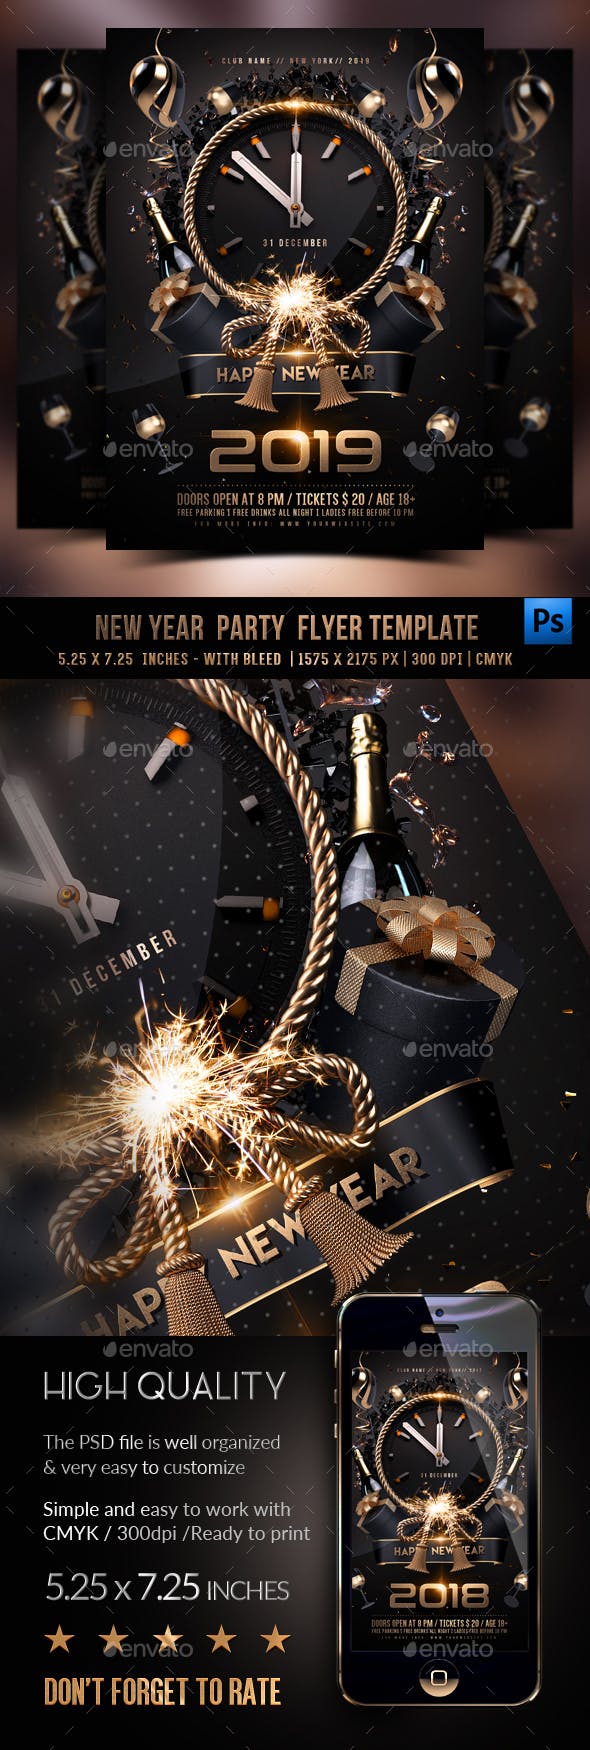 New Year Party Flyer by Rembassio | GraphicRiver 